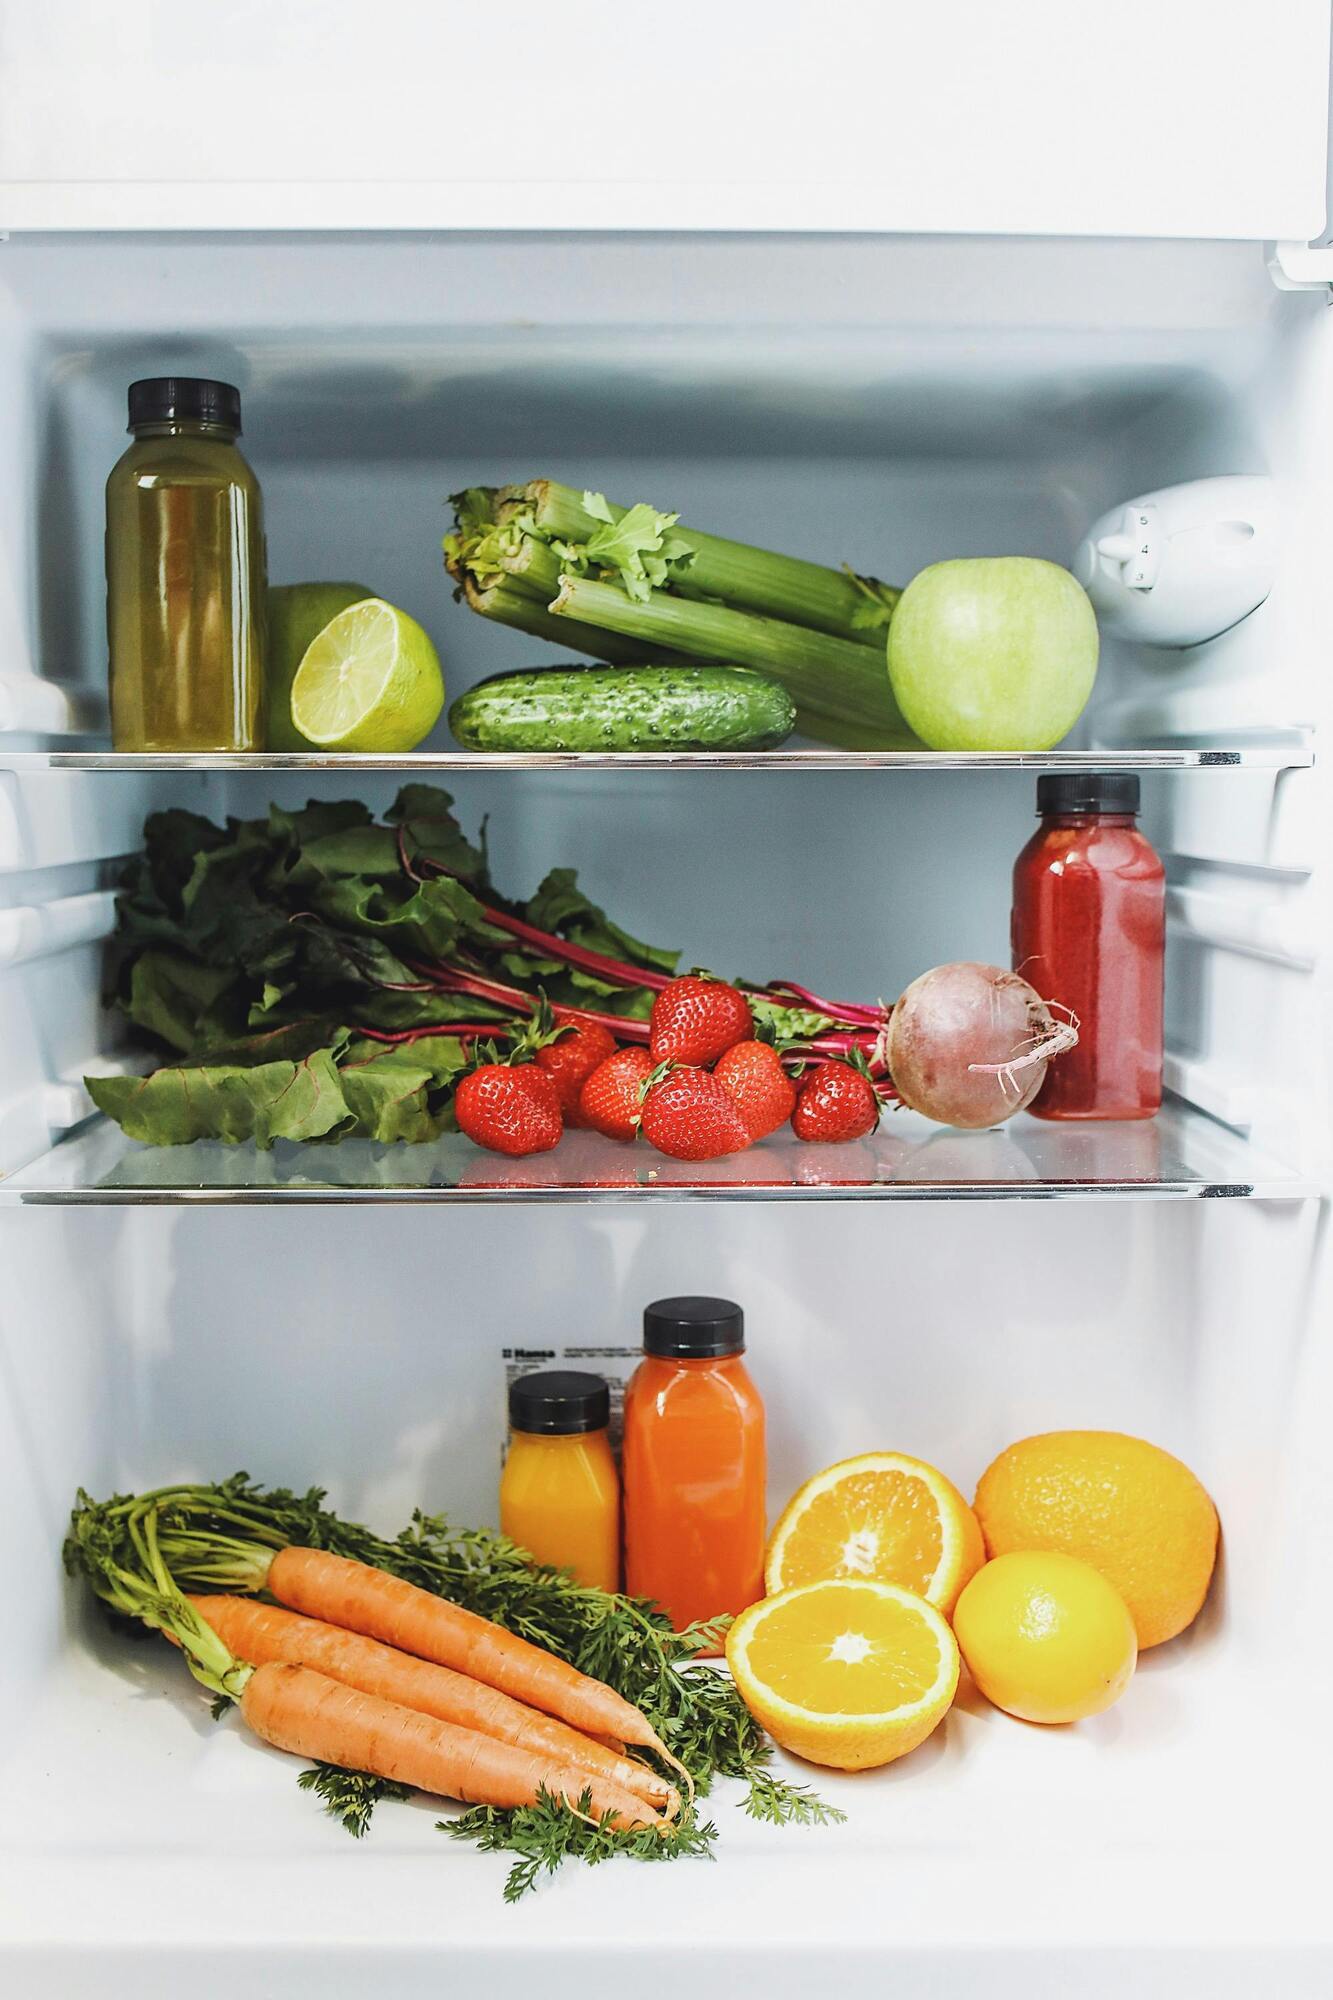 What causes food to spoil quickly in the refrigerator: don't make these mistakes